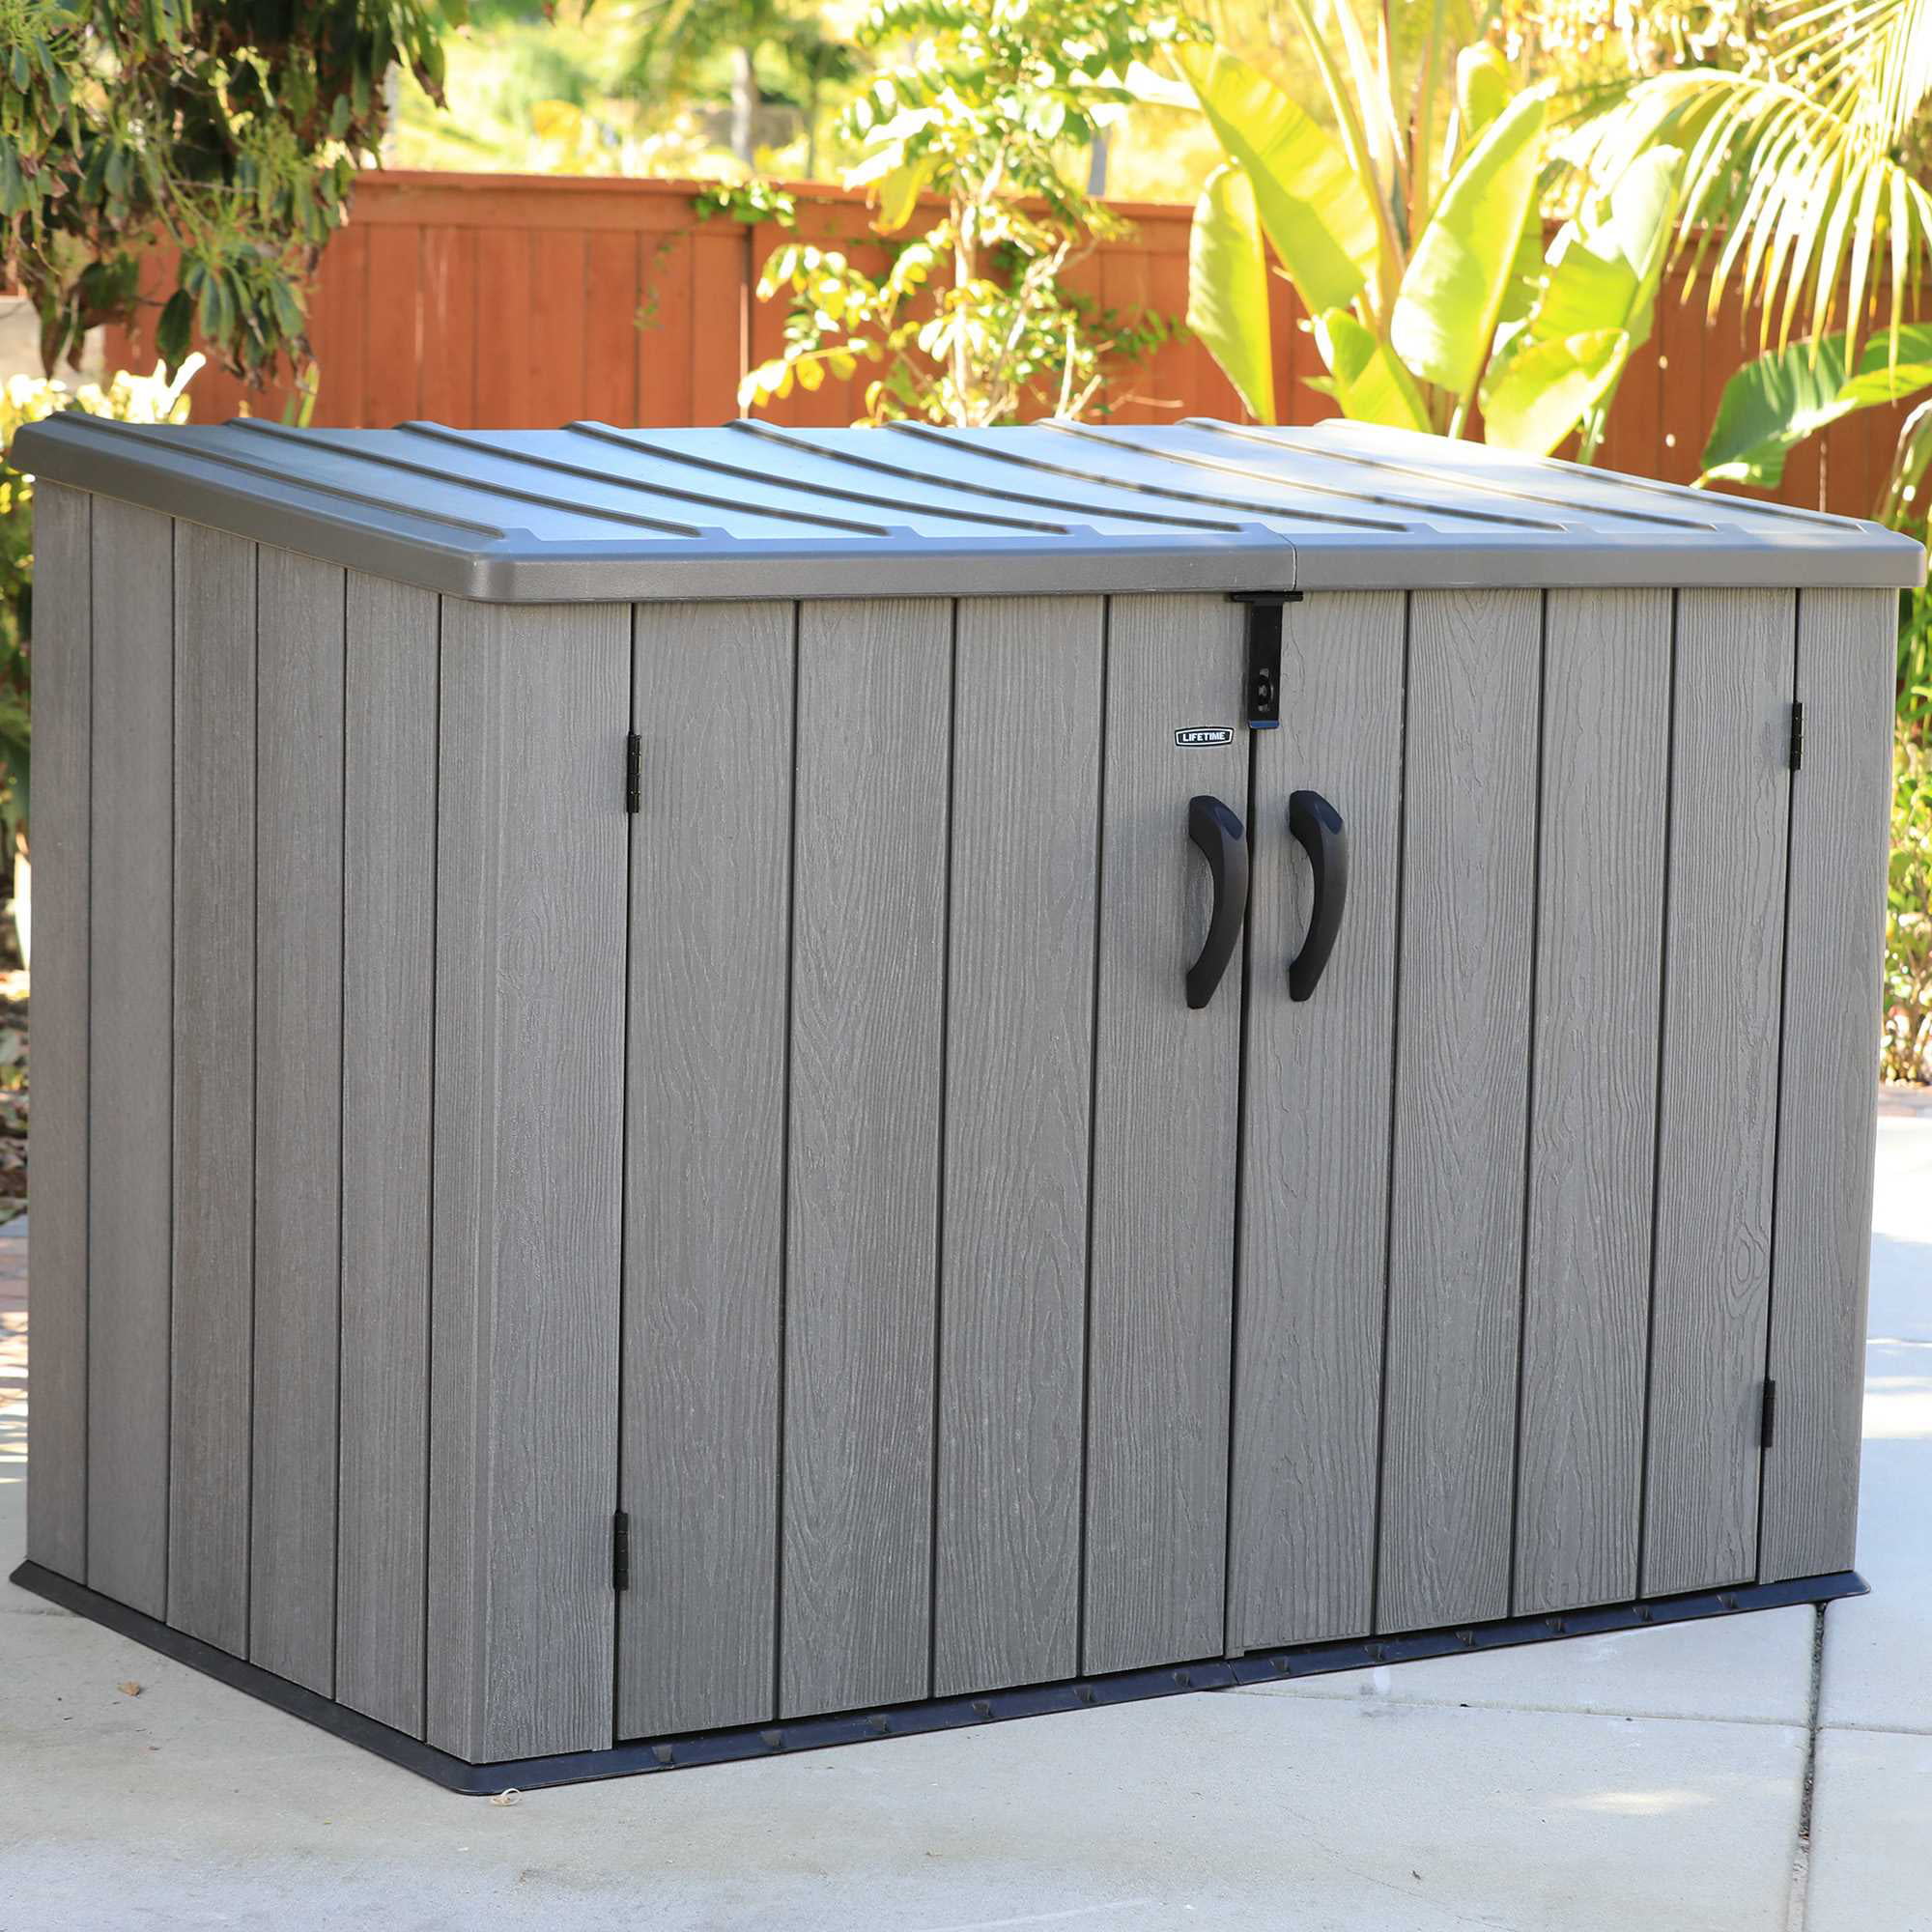 Storage Sheds At Costco / Wts Costco Lifetime Vertical Storage Shed With Storage Hooks ...